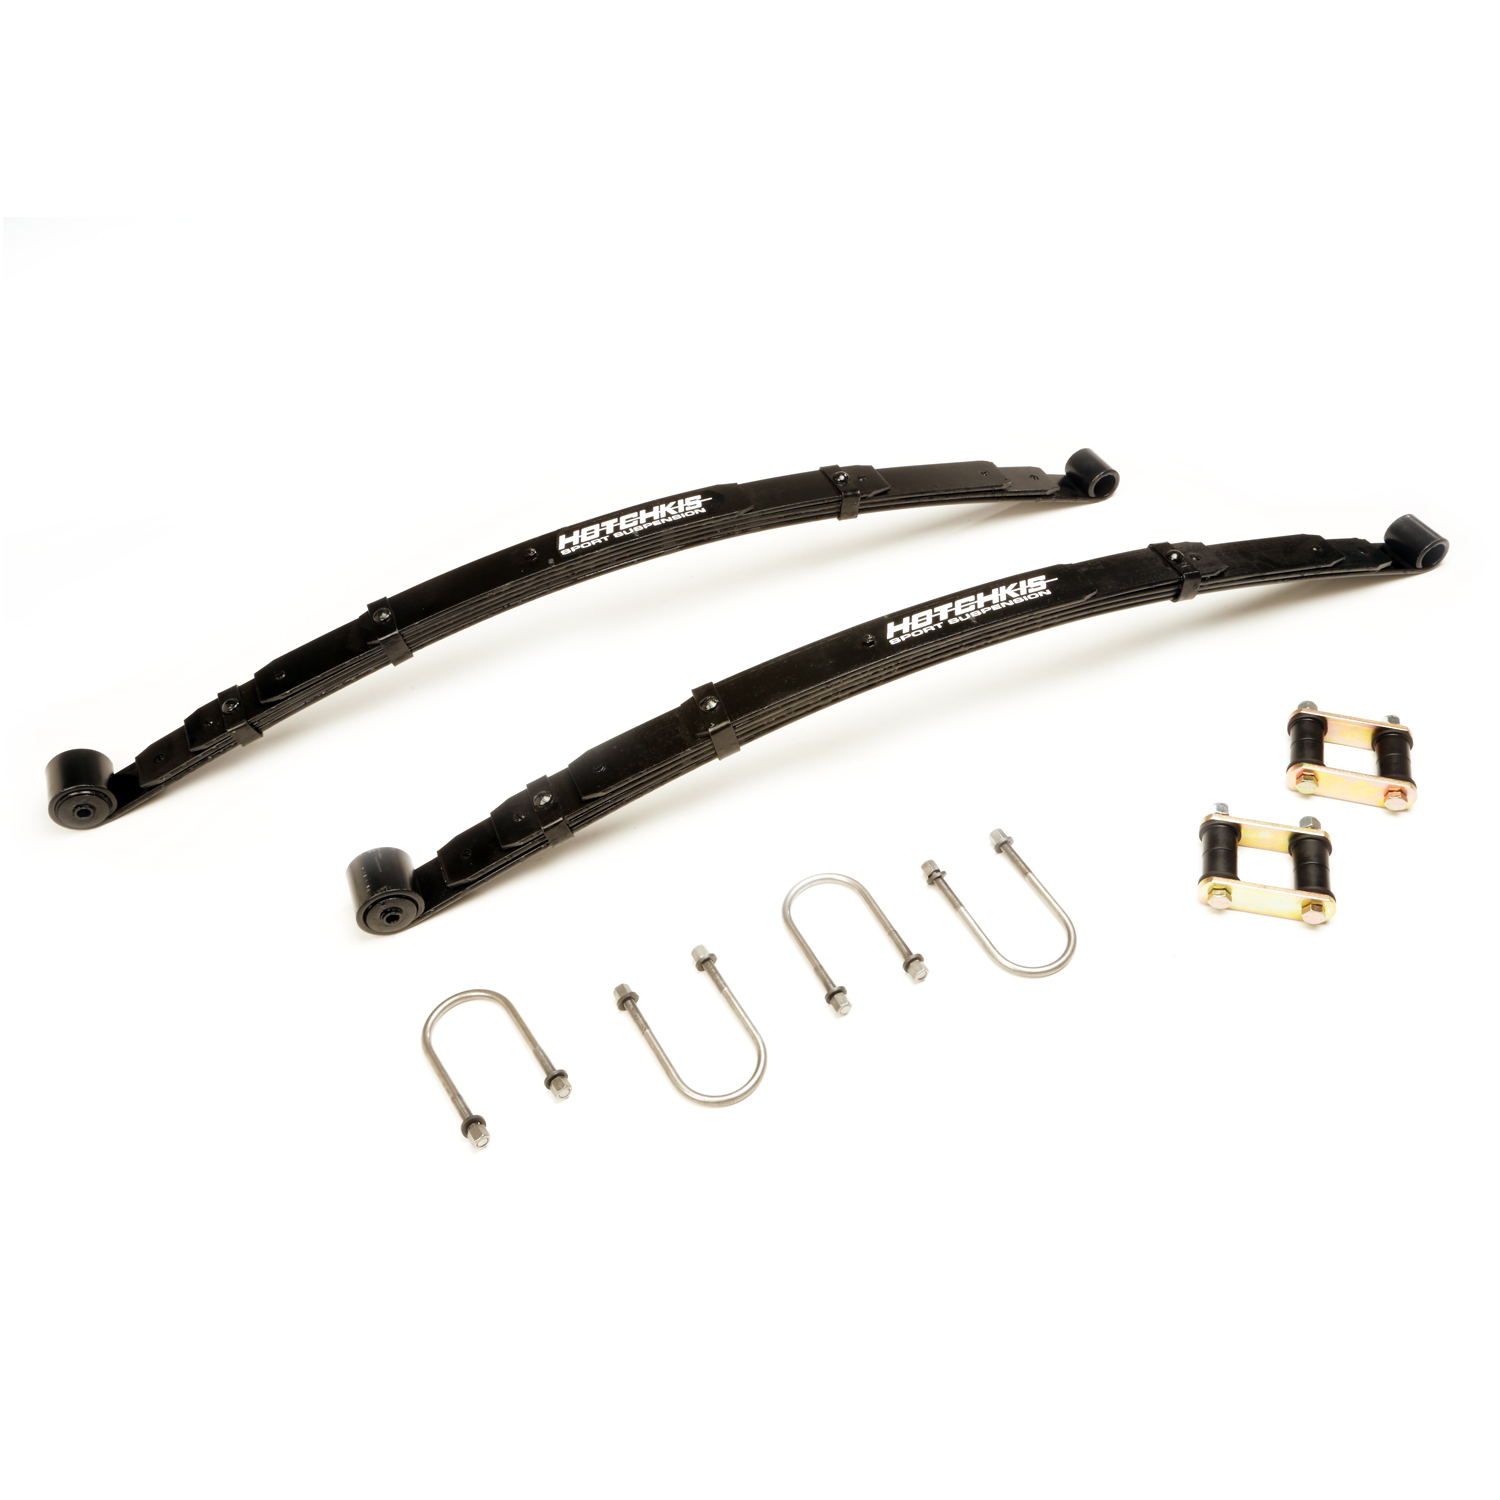 64-66 Mustang Performance Leaf Spring Kit By Hotchkis